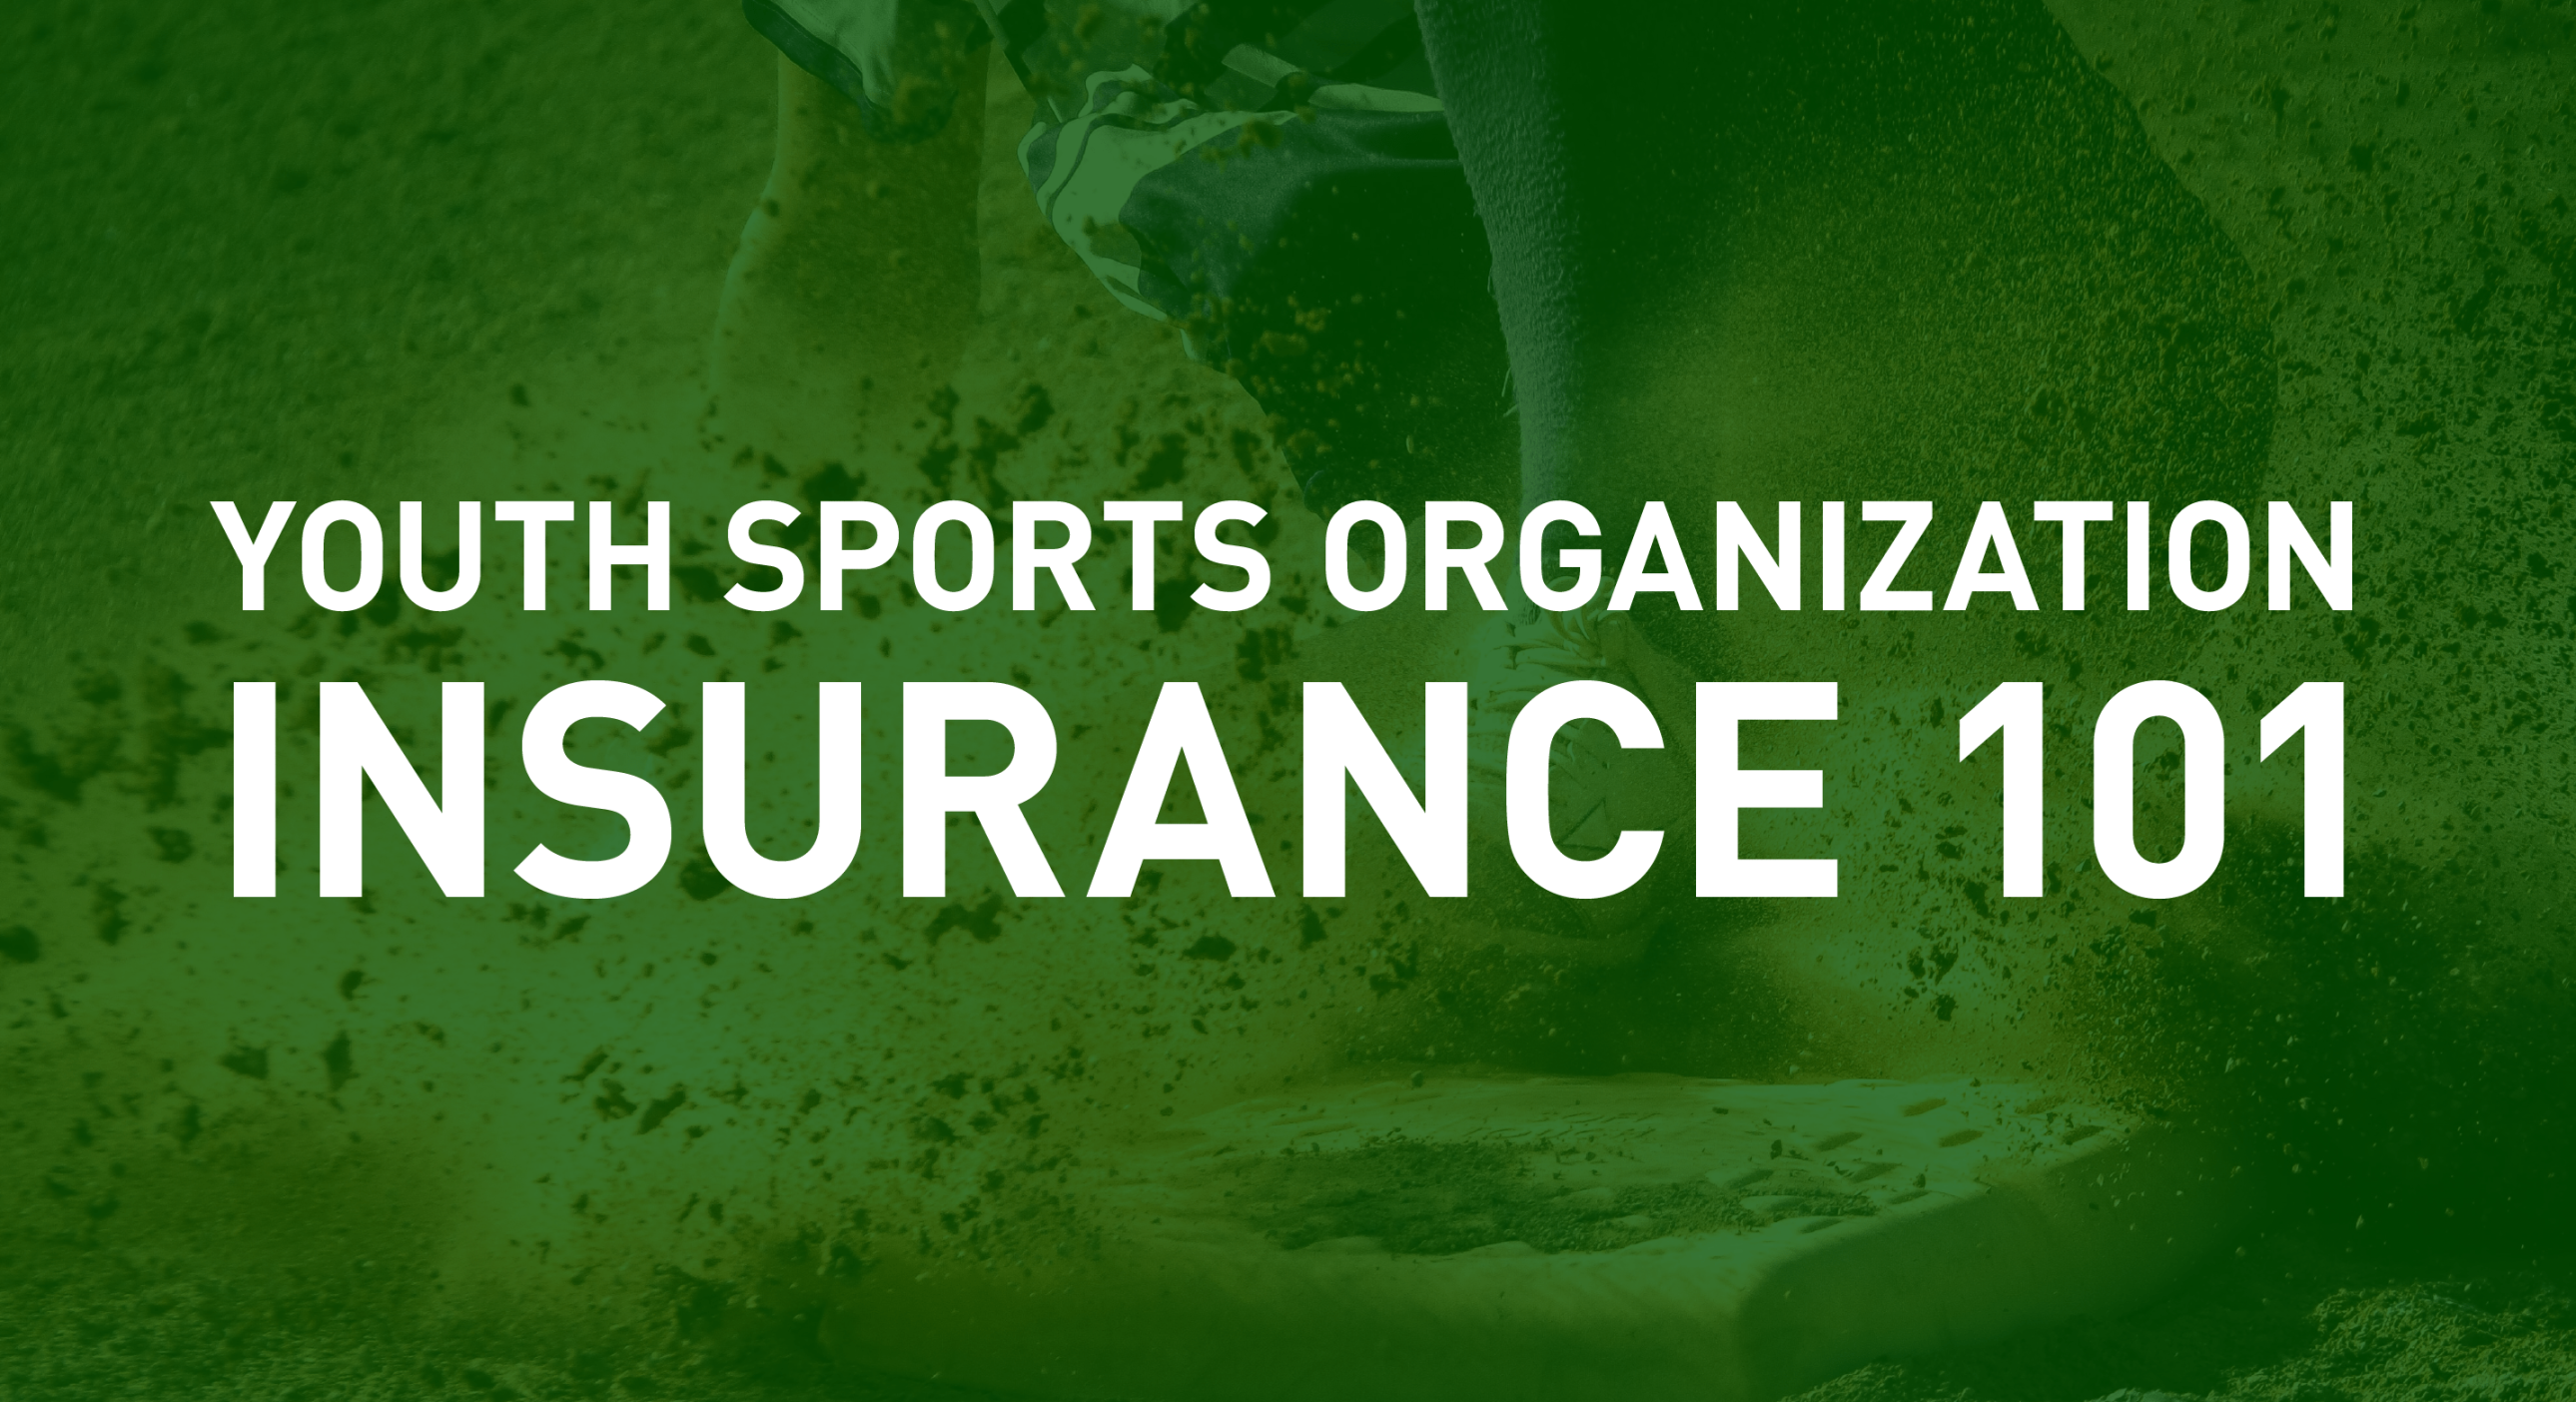 Everything You Need to Know About Youth Sports Insurance